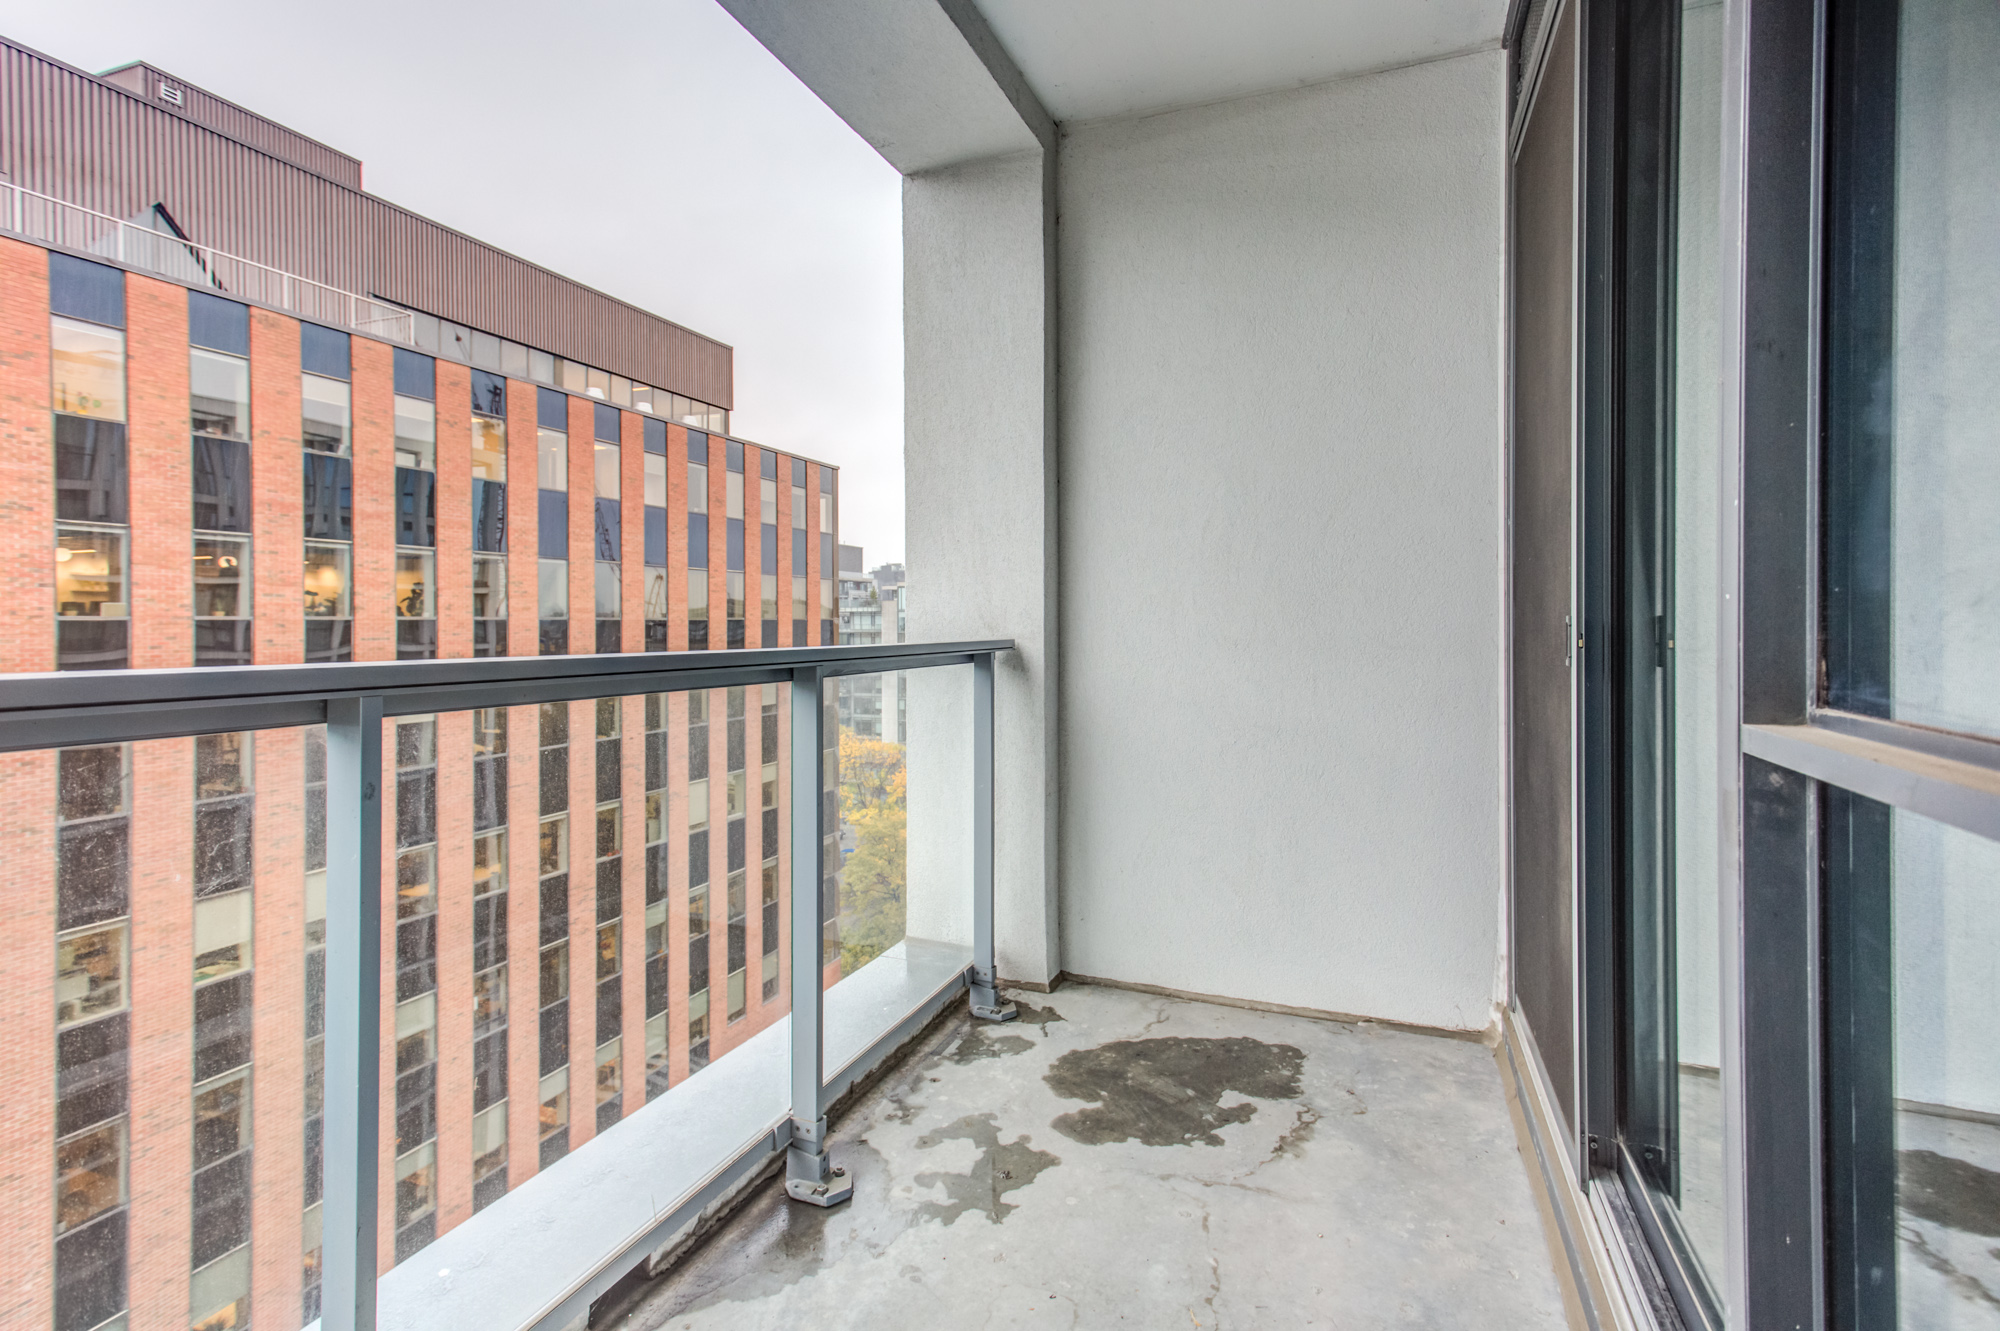 Balcony of 39 Brant St Unit 918, Brant Park Lofts, with glass-panels.